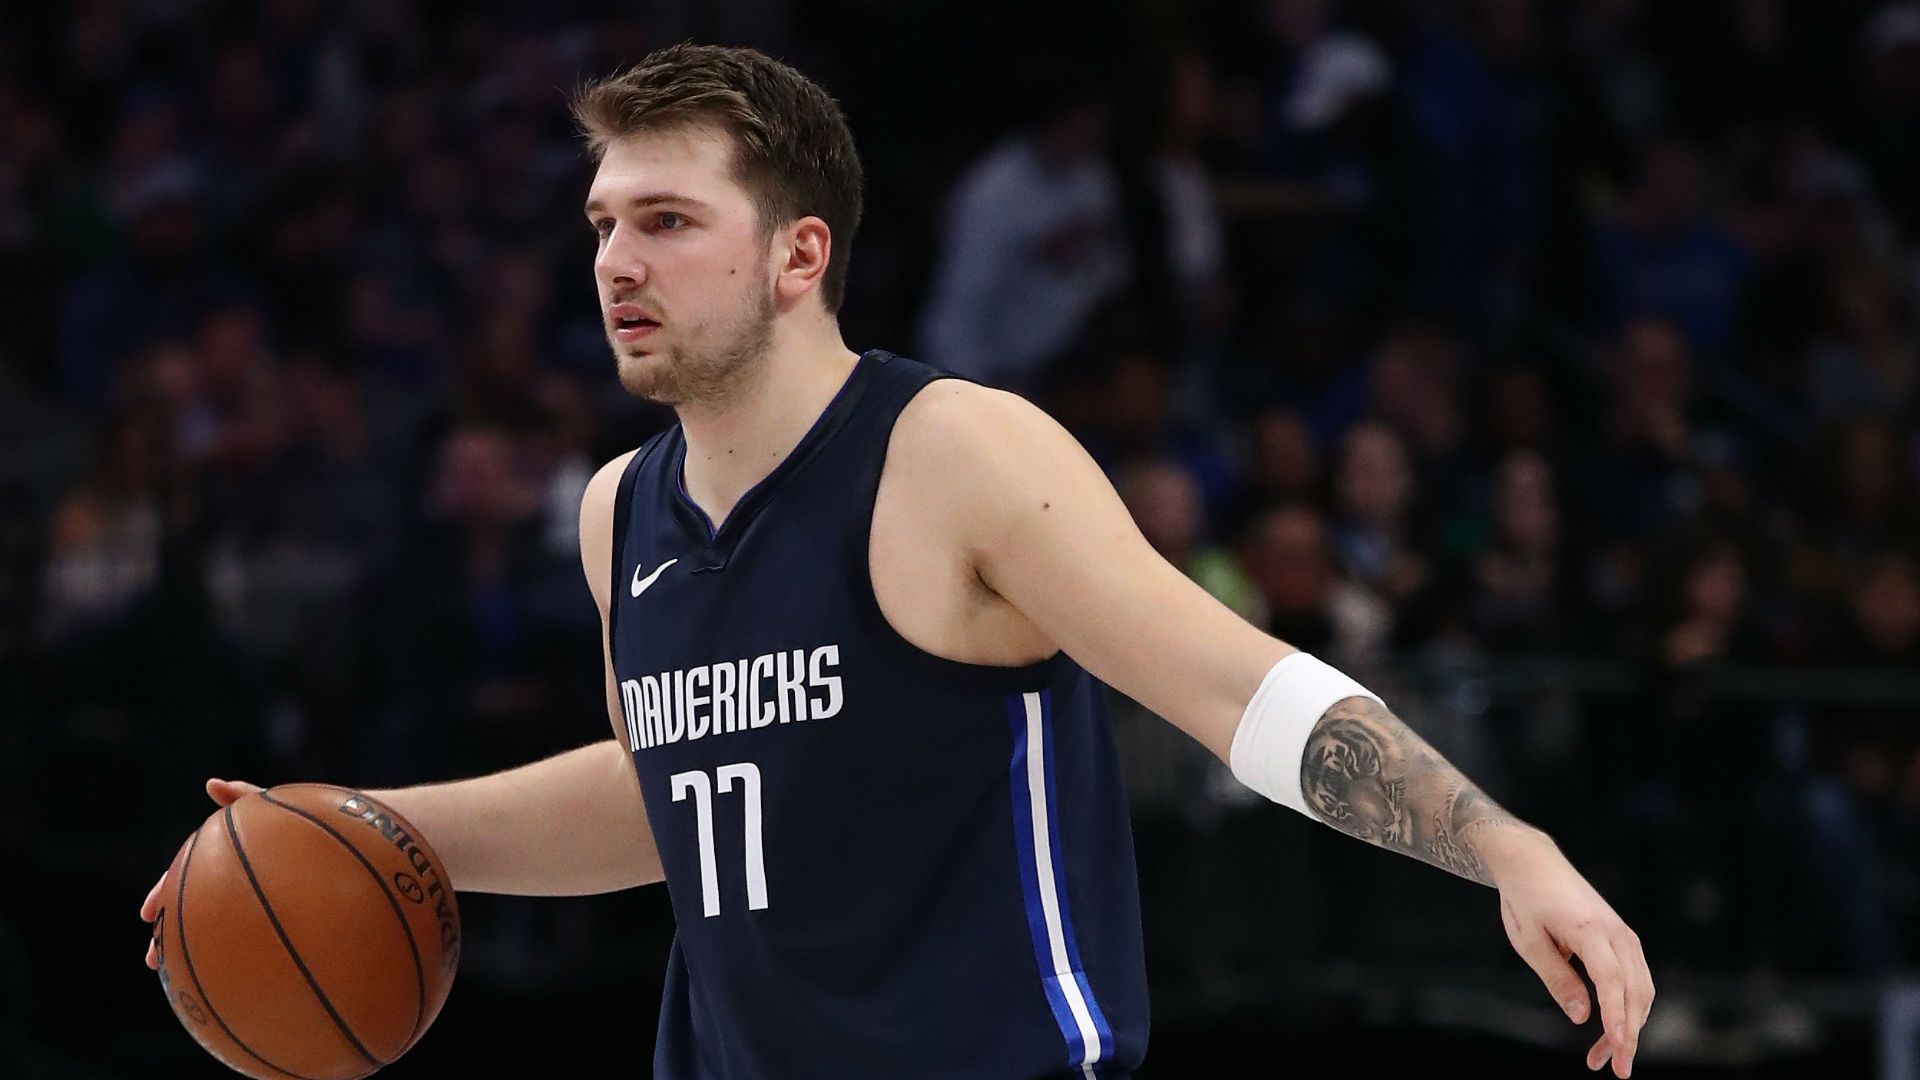 NBA playoffs still the only goal for Dallas Mavericks, insists Luka Doncic